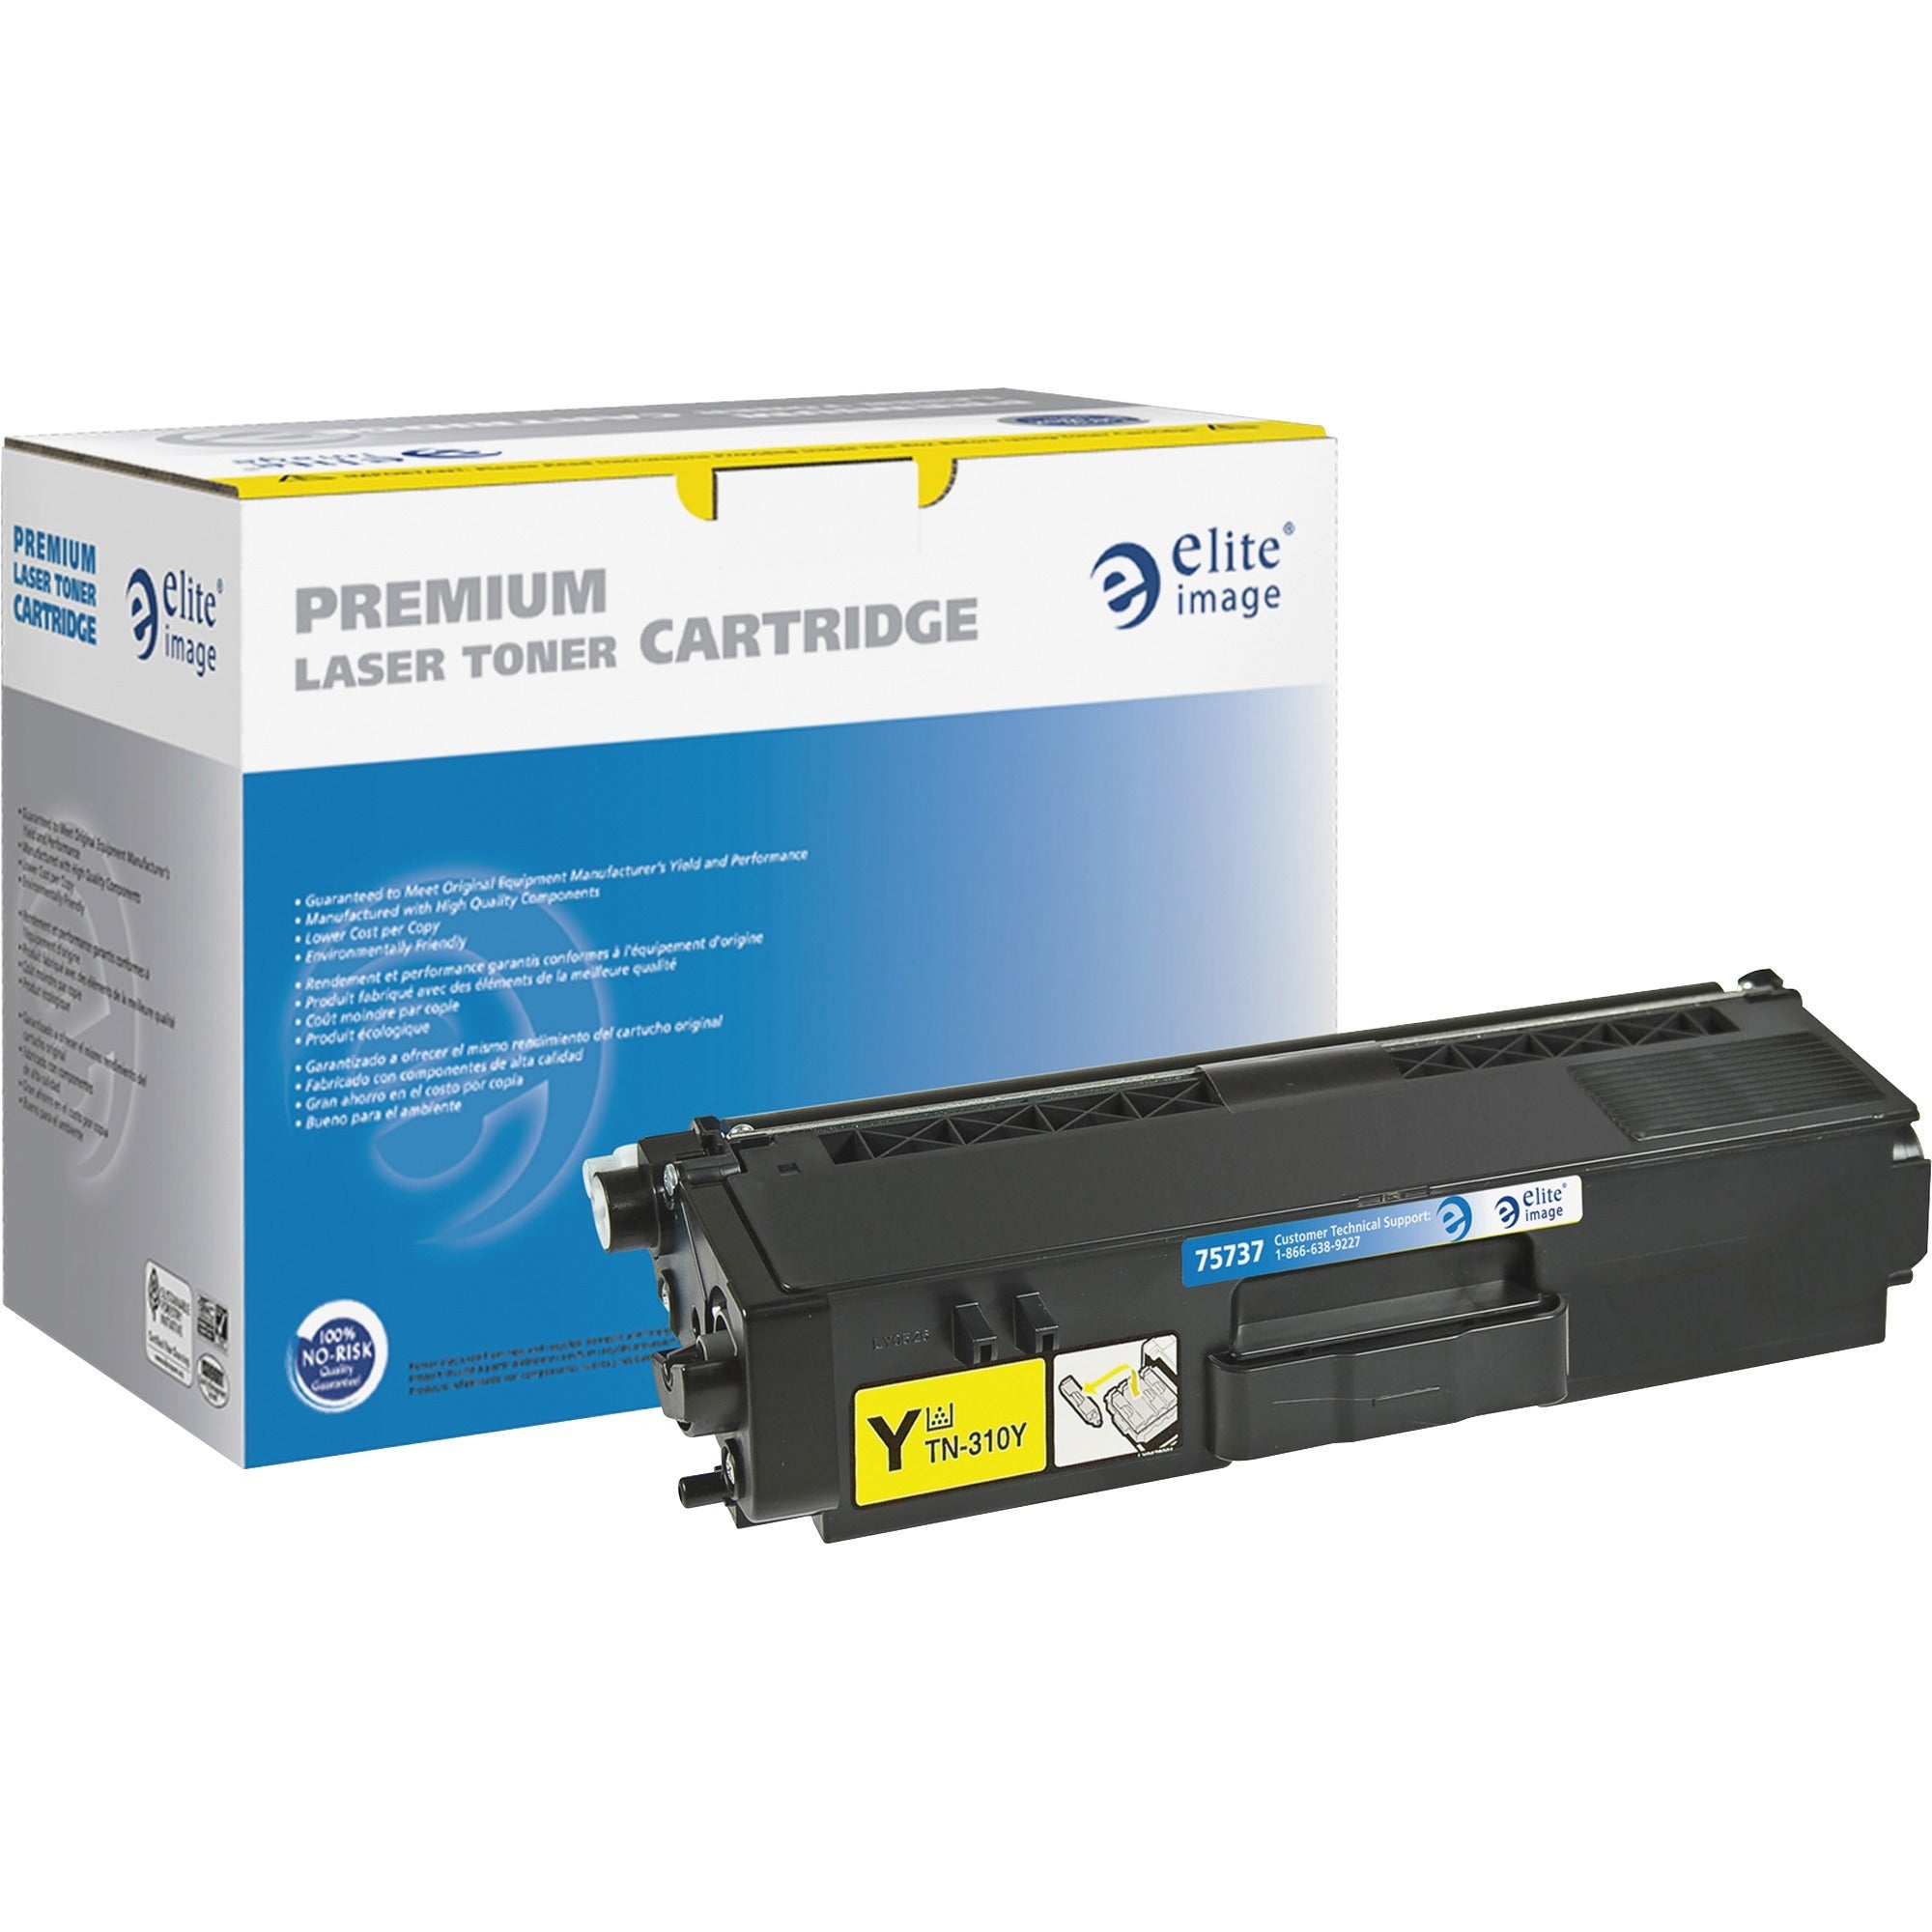 Elite Image Remanufactured High Yield Laser Toner Cartridge - Alternative for Brother TN315 - Yellow - 1 Each - 3500 Pages